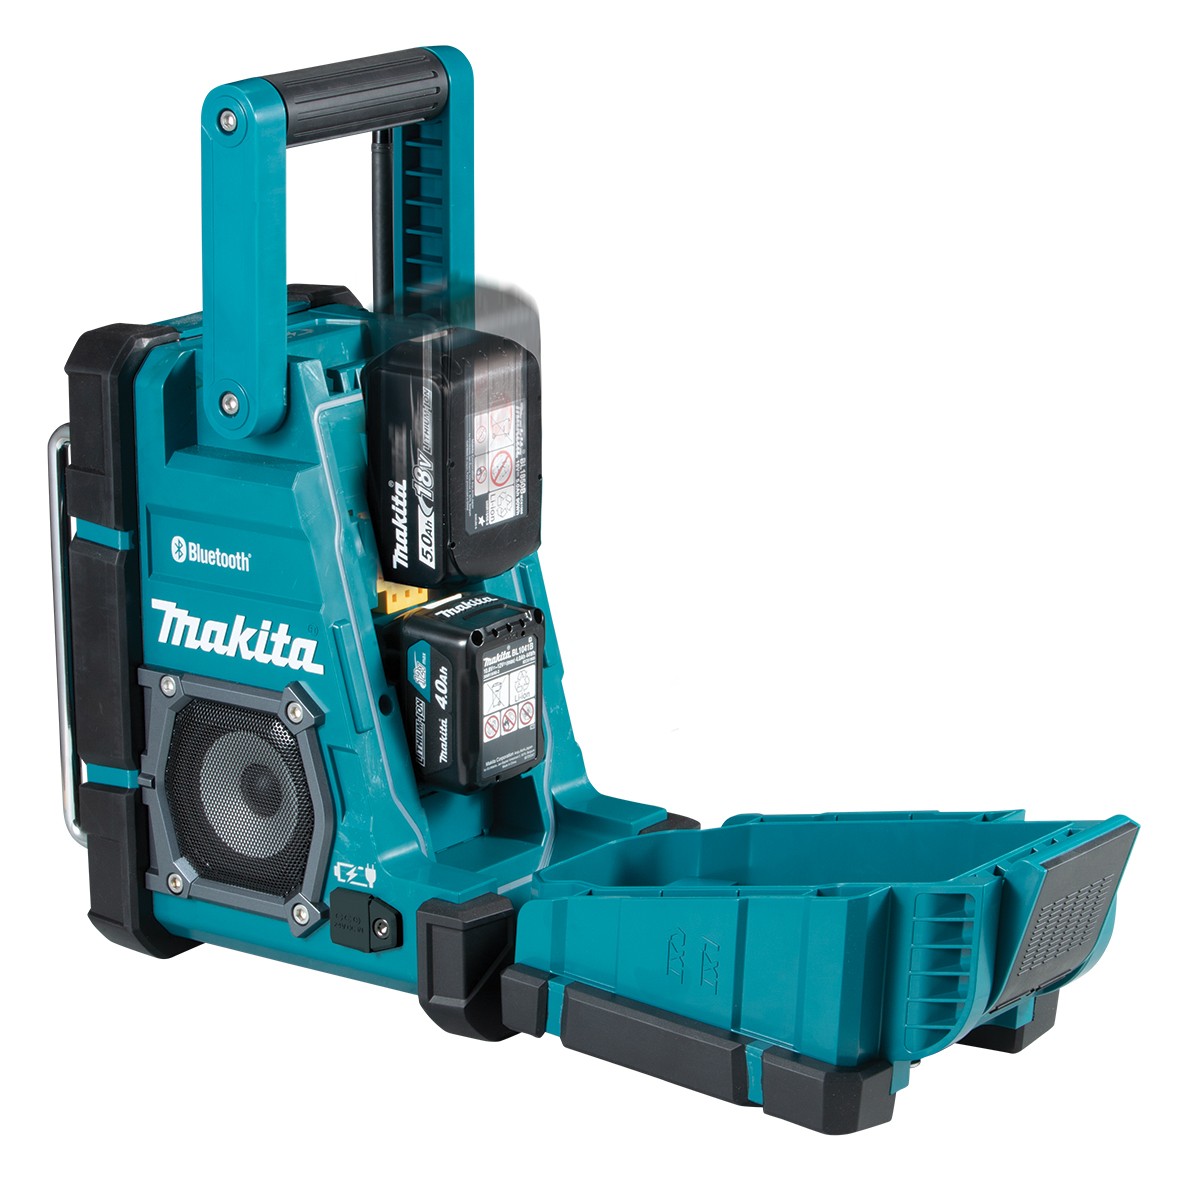 Digital Bluetooth Jobsite Charger Radio Bare (Tool Only) DMR301 by Makita